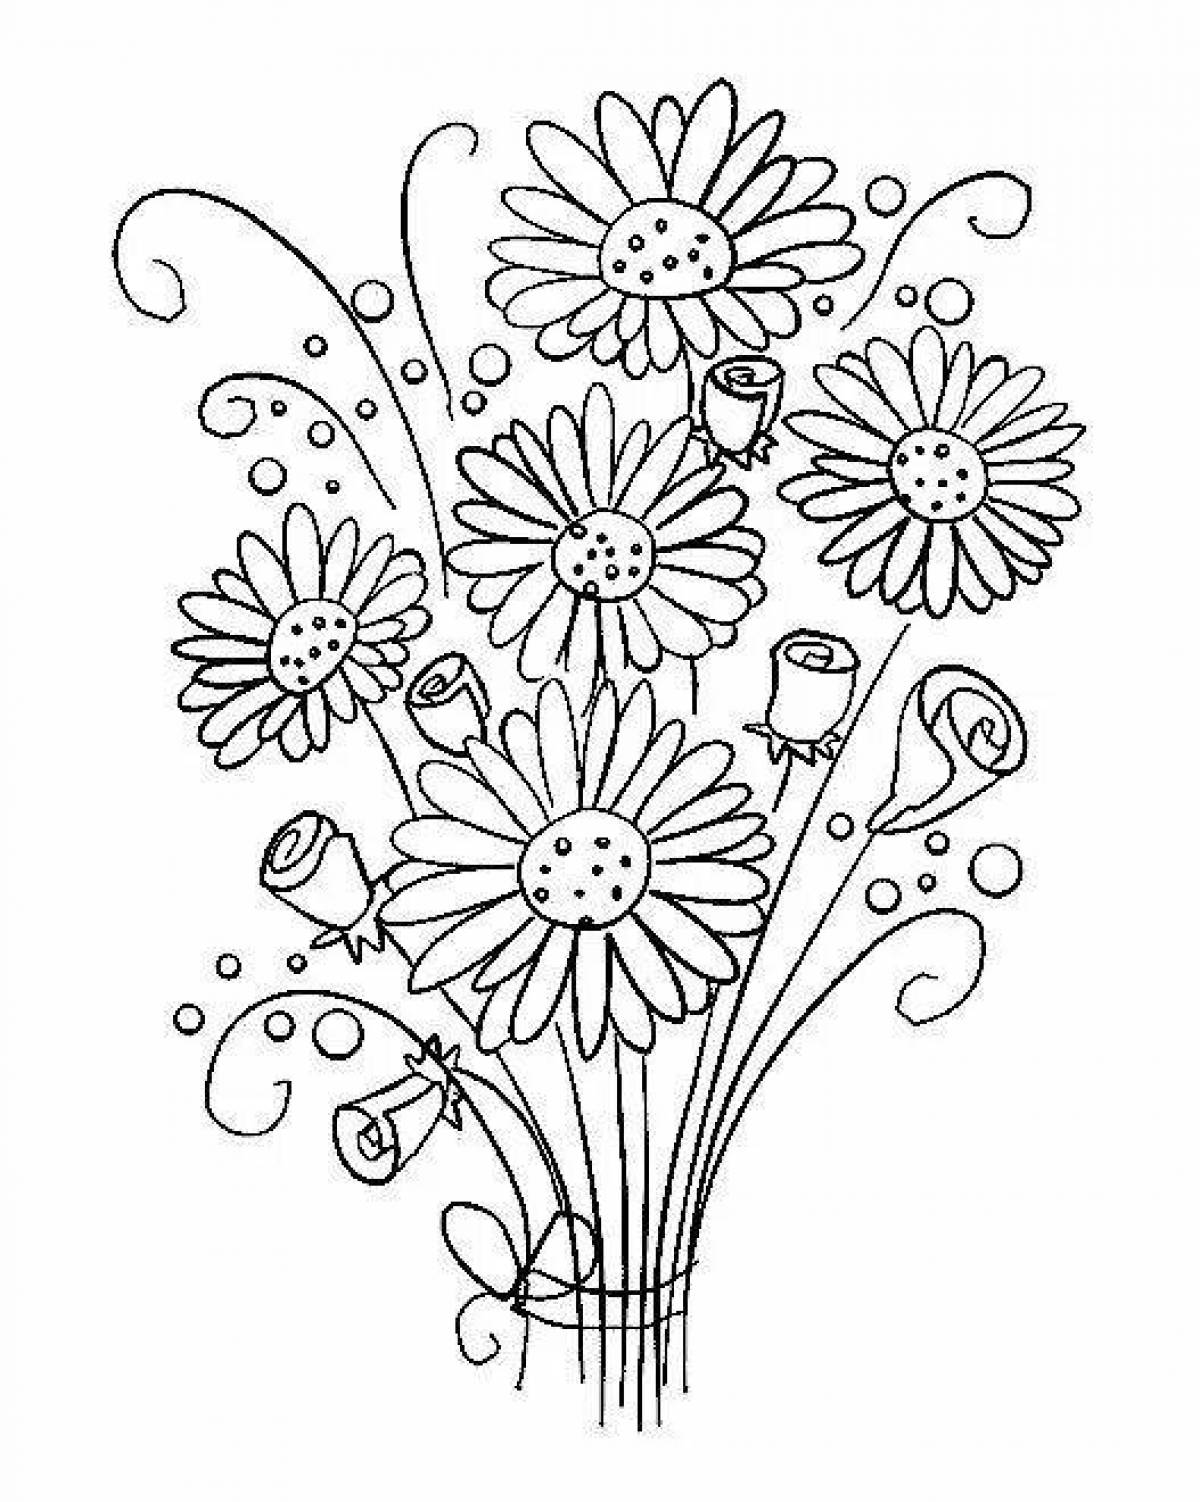 Coloring page blissful bouquet of daisies